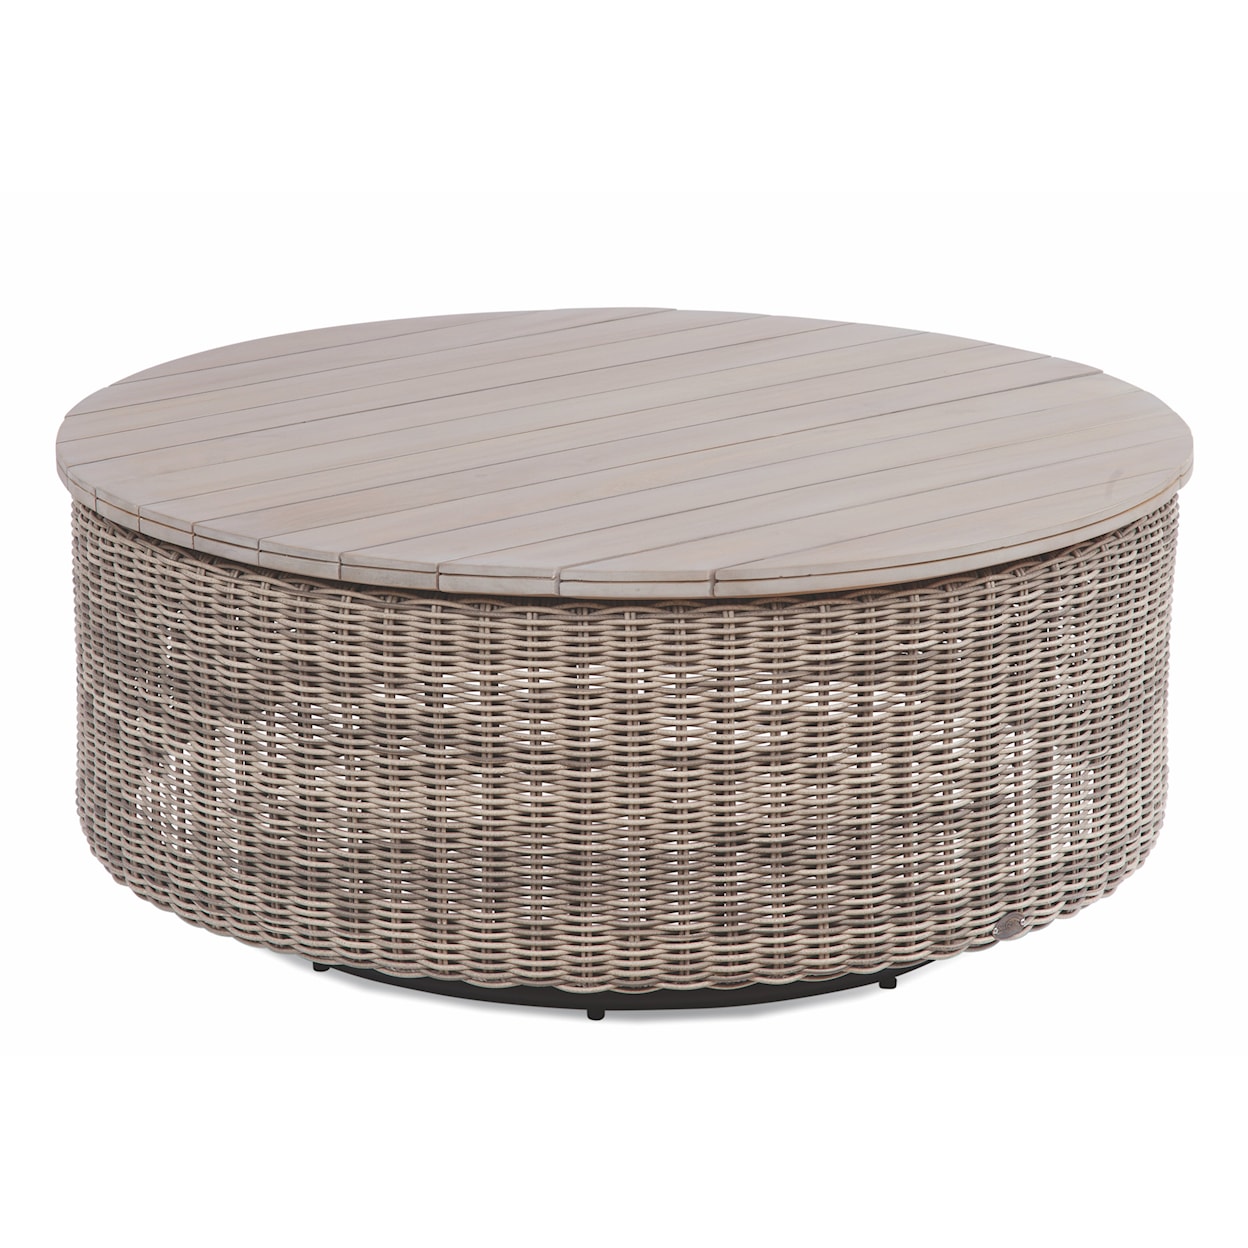 Braxton Culler Paradise Bay Outdoor Chat Table